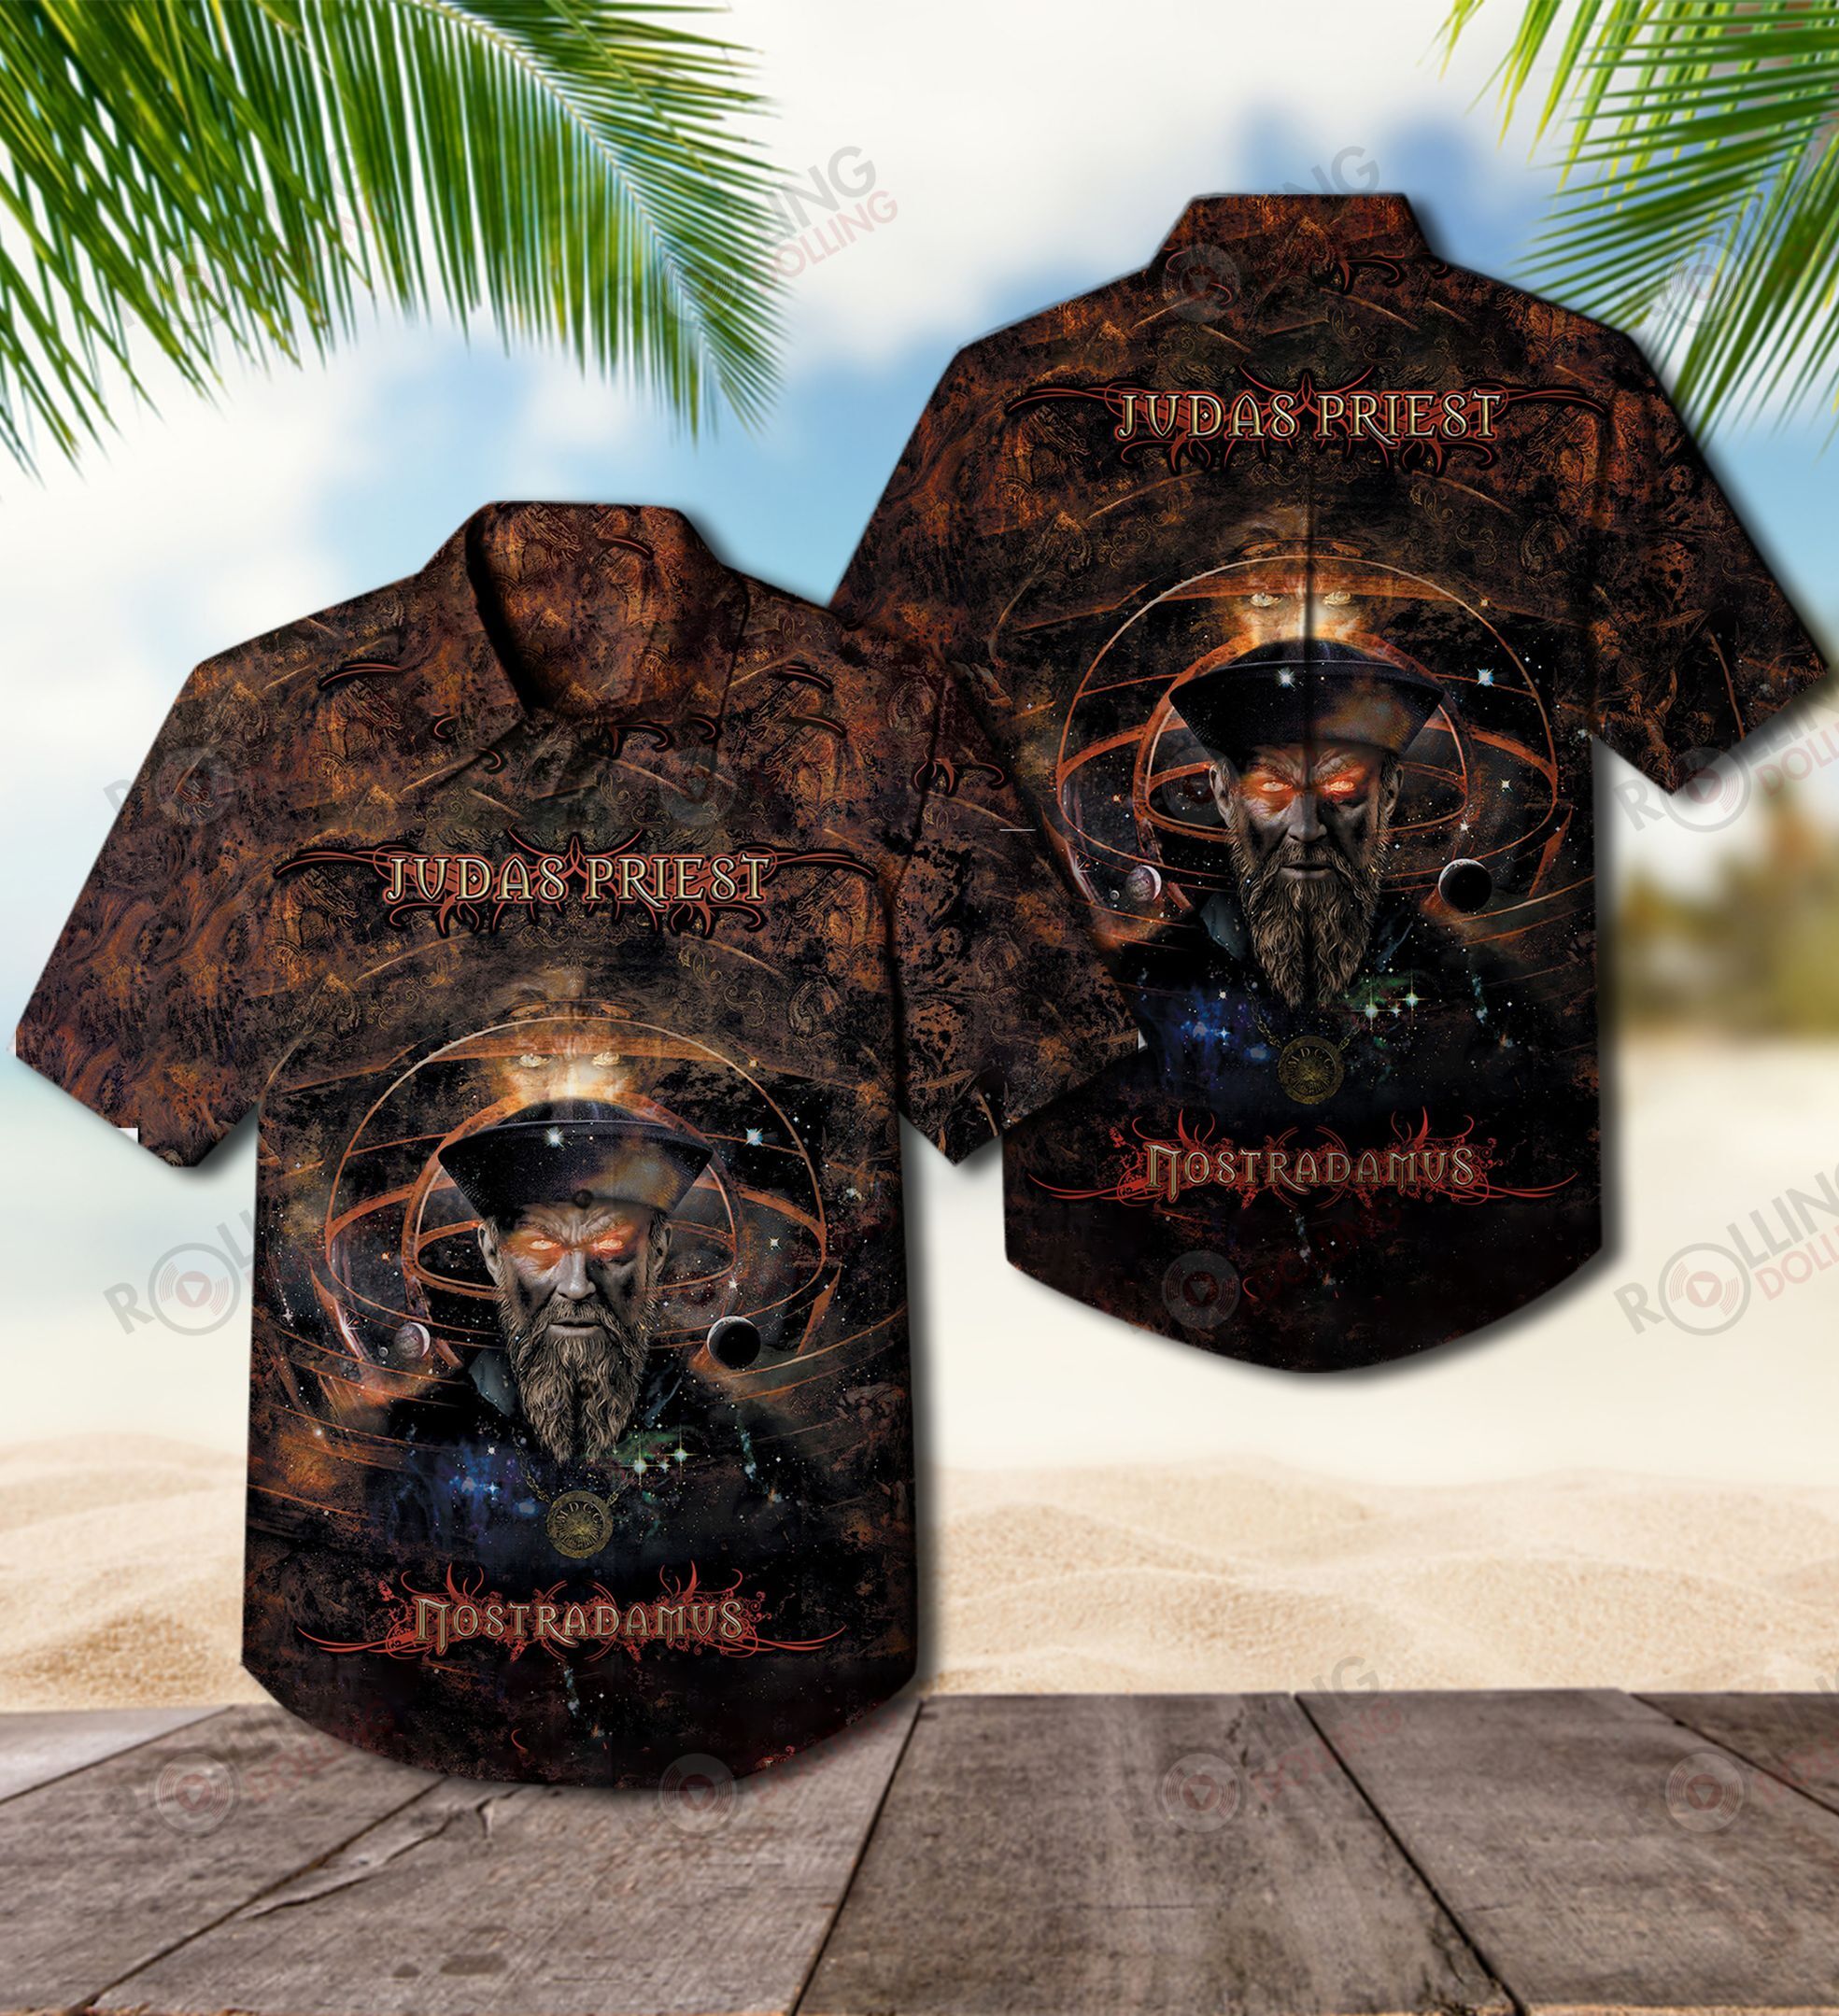 For summer, consider wearing This Amazing Hawaiian Shirt shirt in our store 84